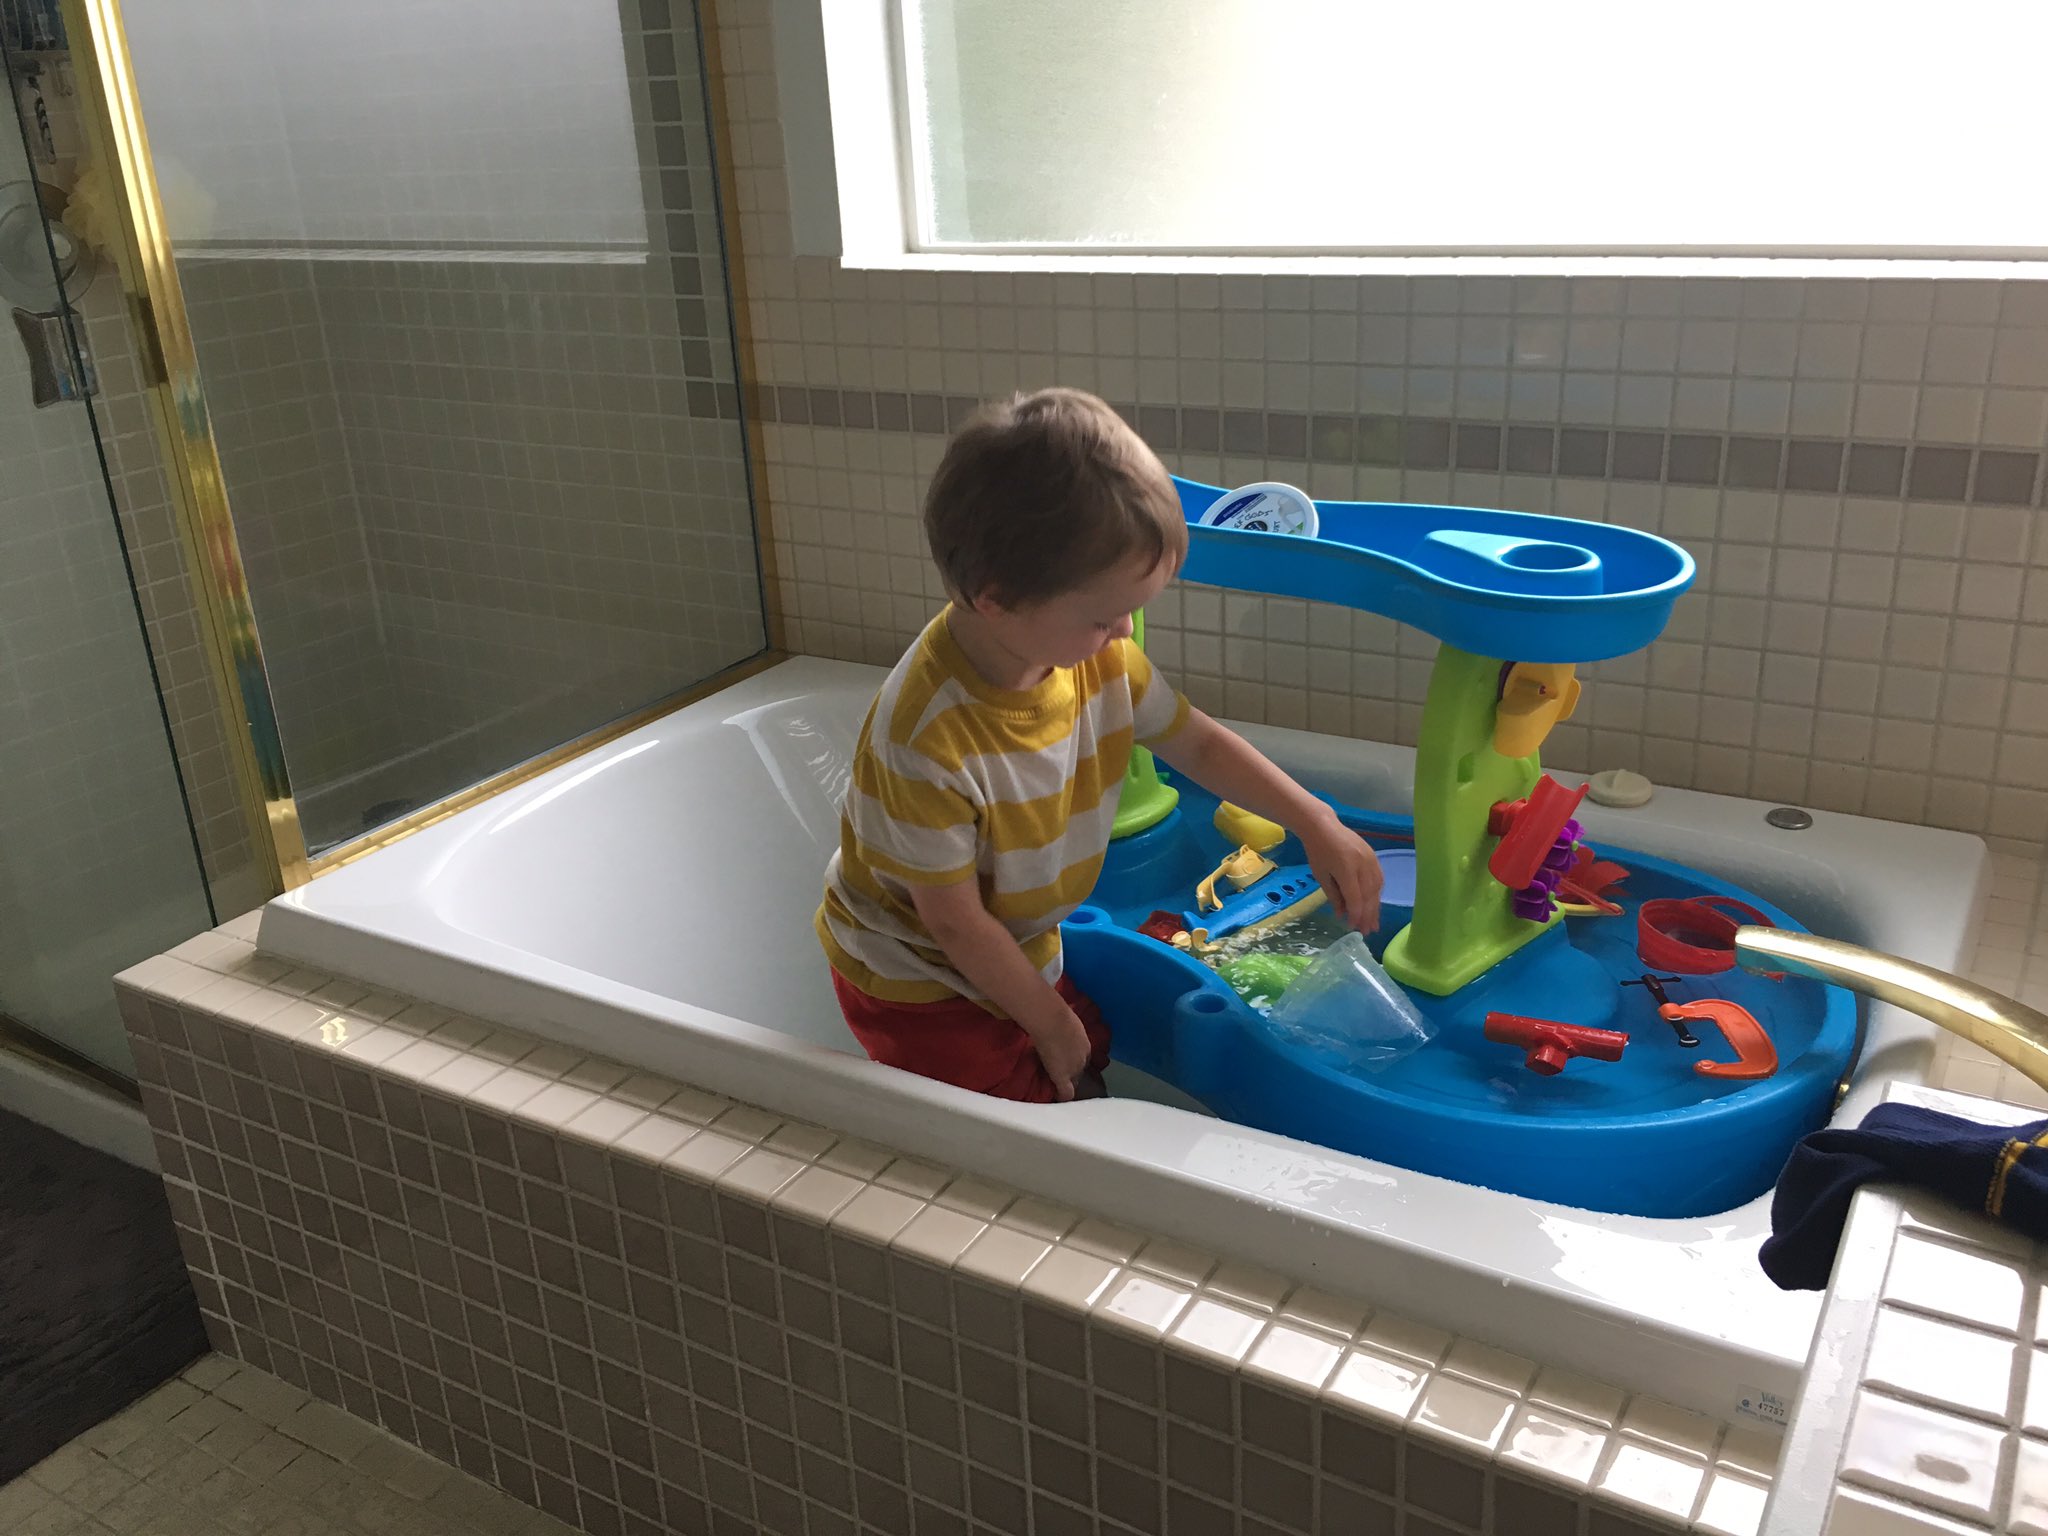 Julian standing in a large master bathtub playing with a blue water table, also in the bathtub.